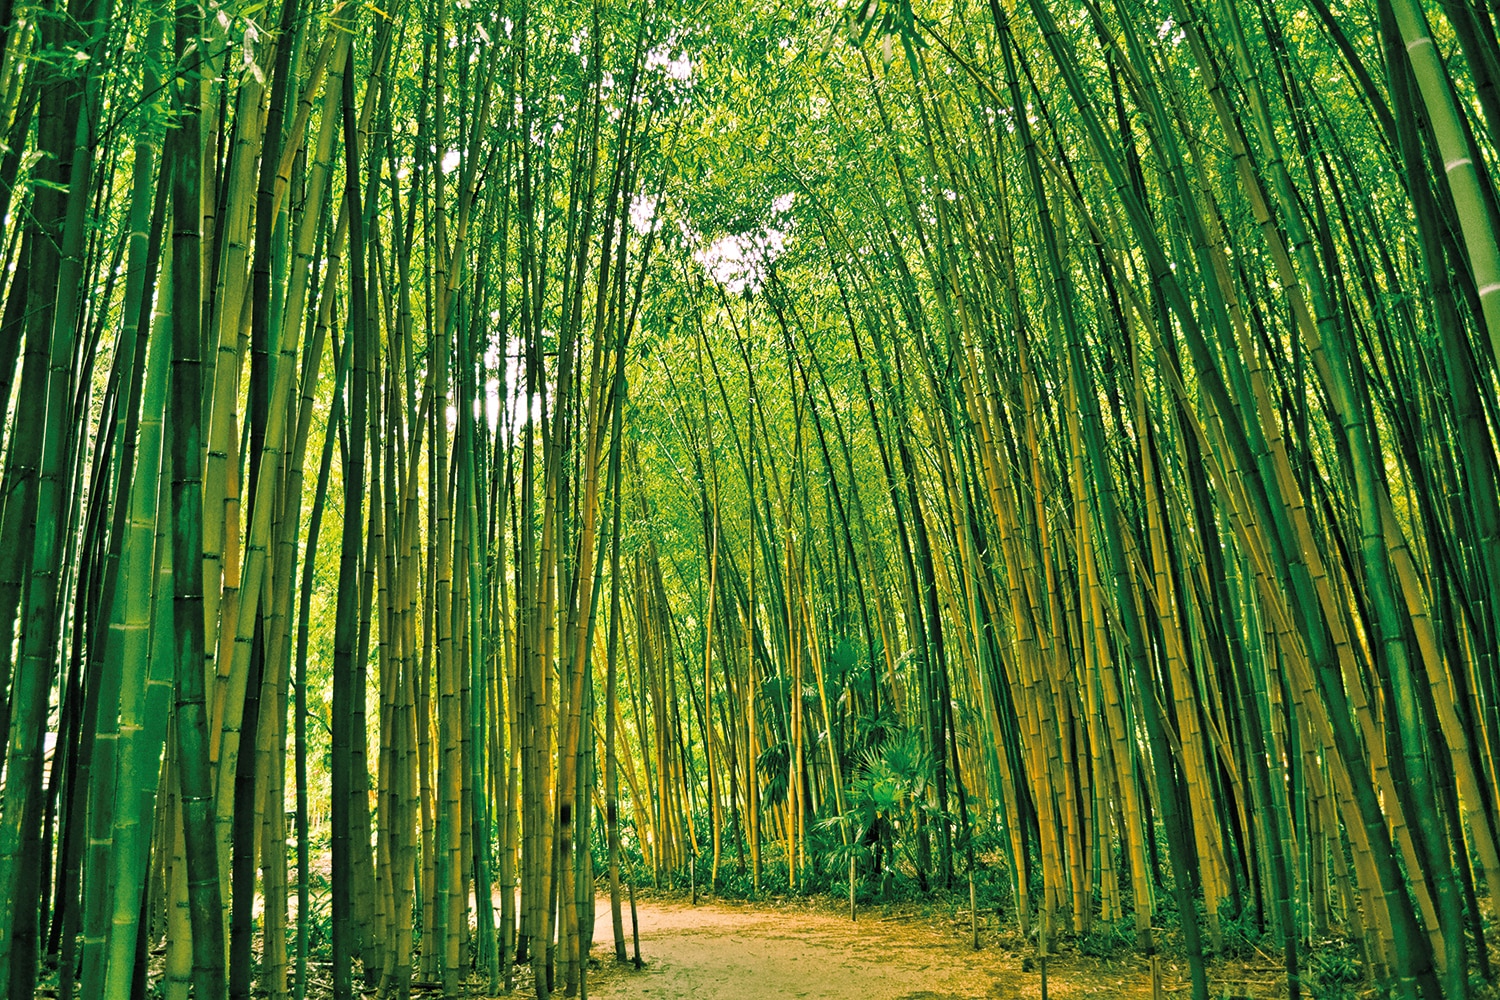 Papermoon Fototapete "Bamboo Forest"